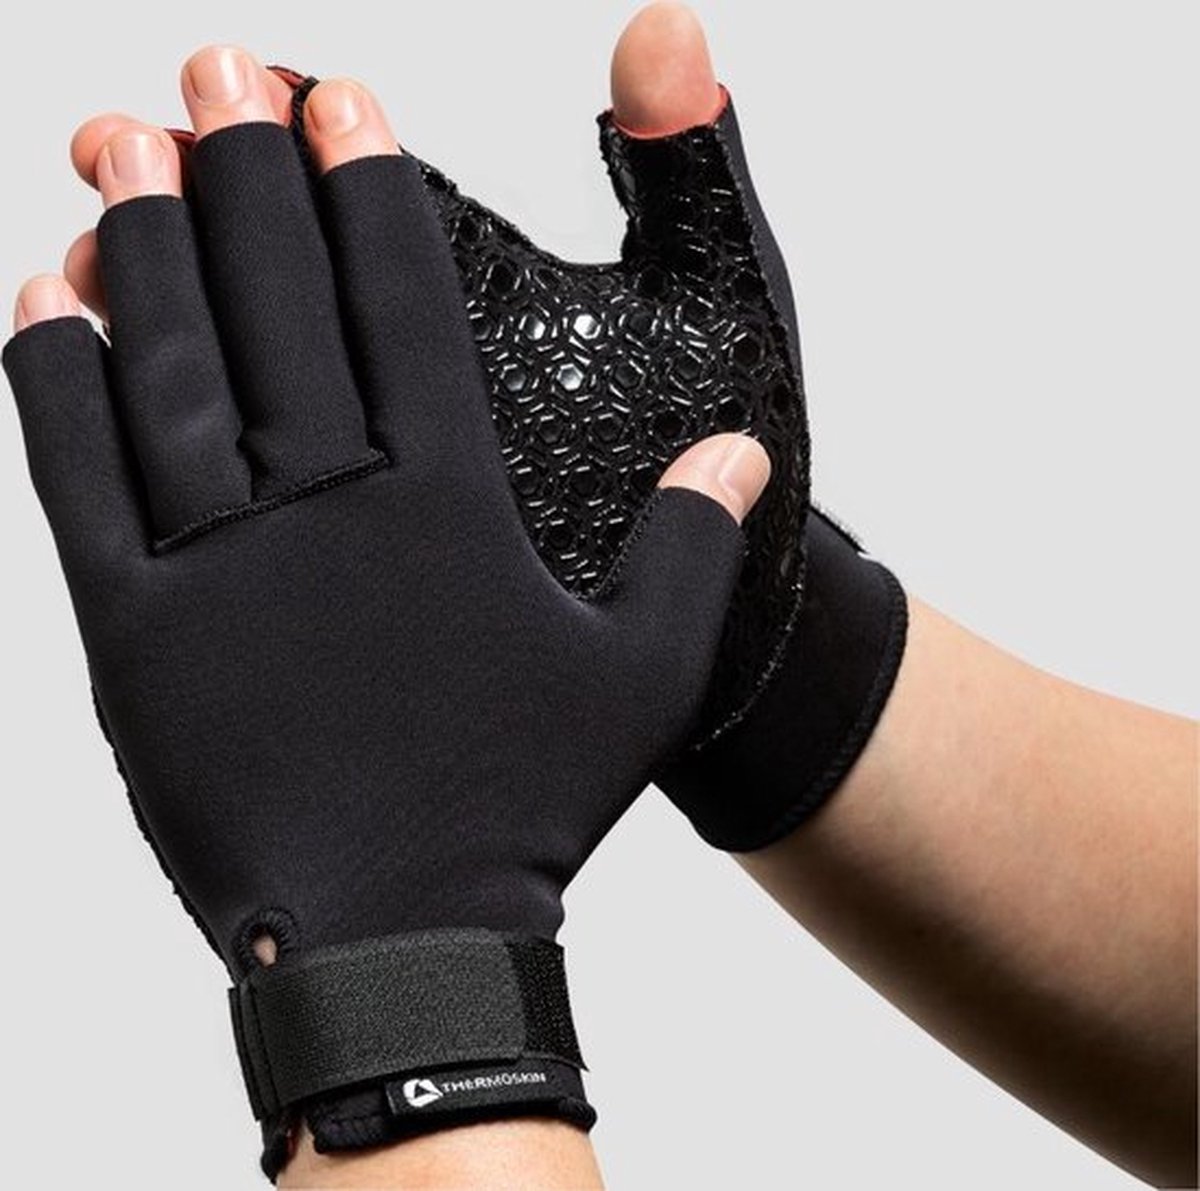 Thermoskin - Thermal Compression Gloves - XS - zwart